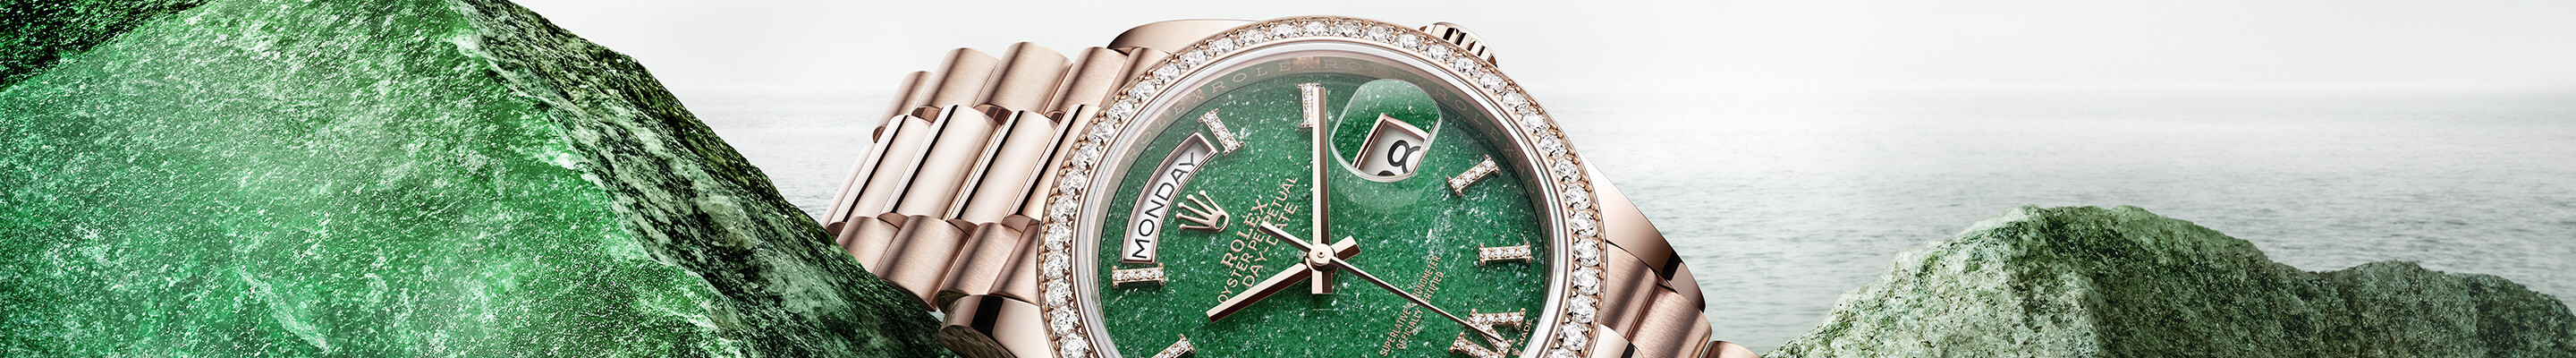 ROLEX DAY-DATE at Dubail